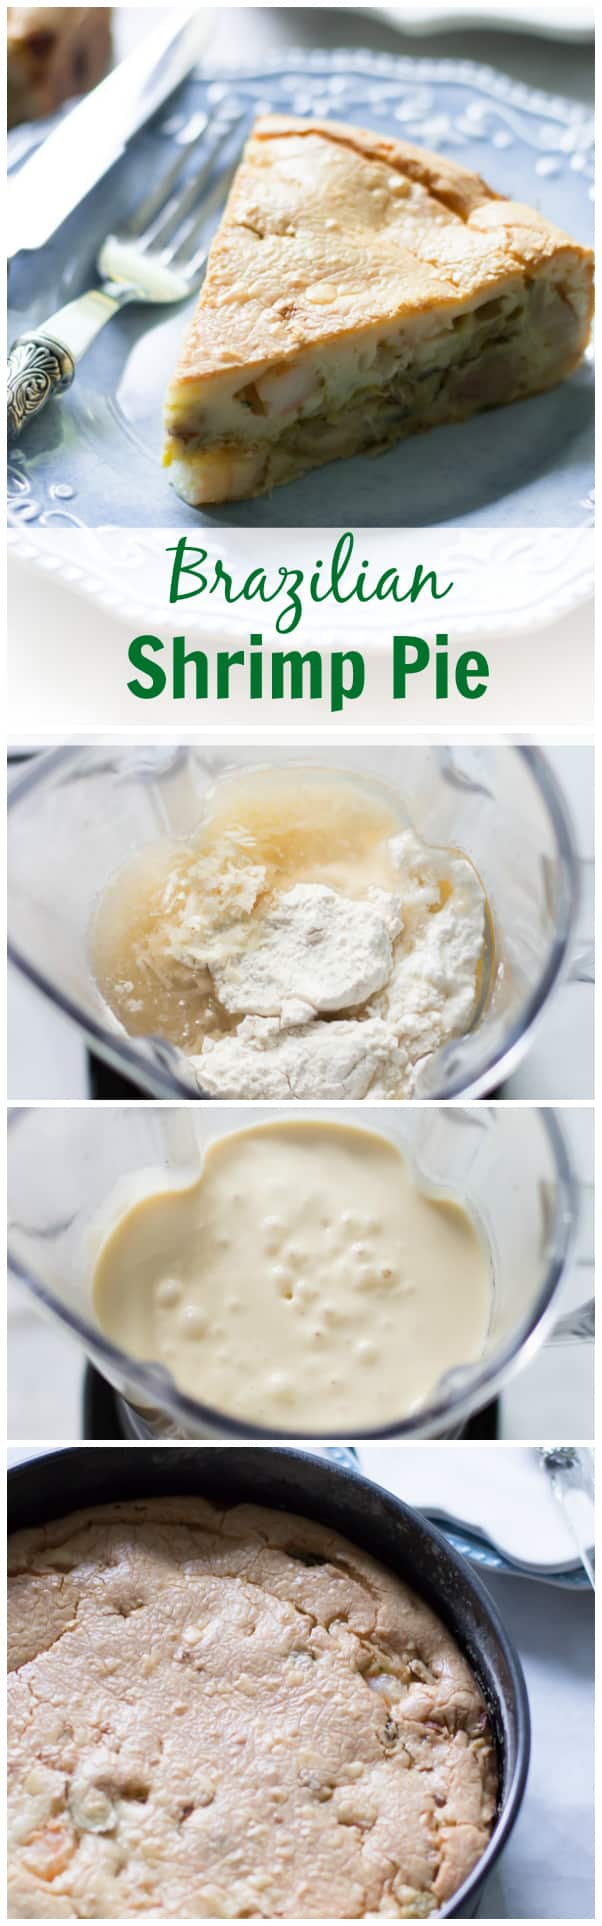 Brazilian Shrimp Pie - This traditional Brazilian shrimp pie recipe is simple, healthy and most importantly delicious. You won't believe how easy is to make the dough!